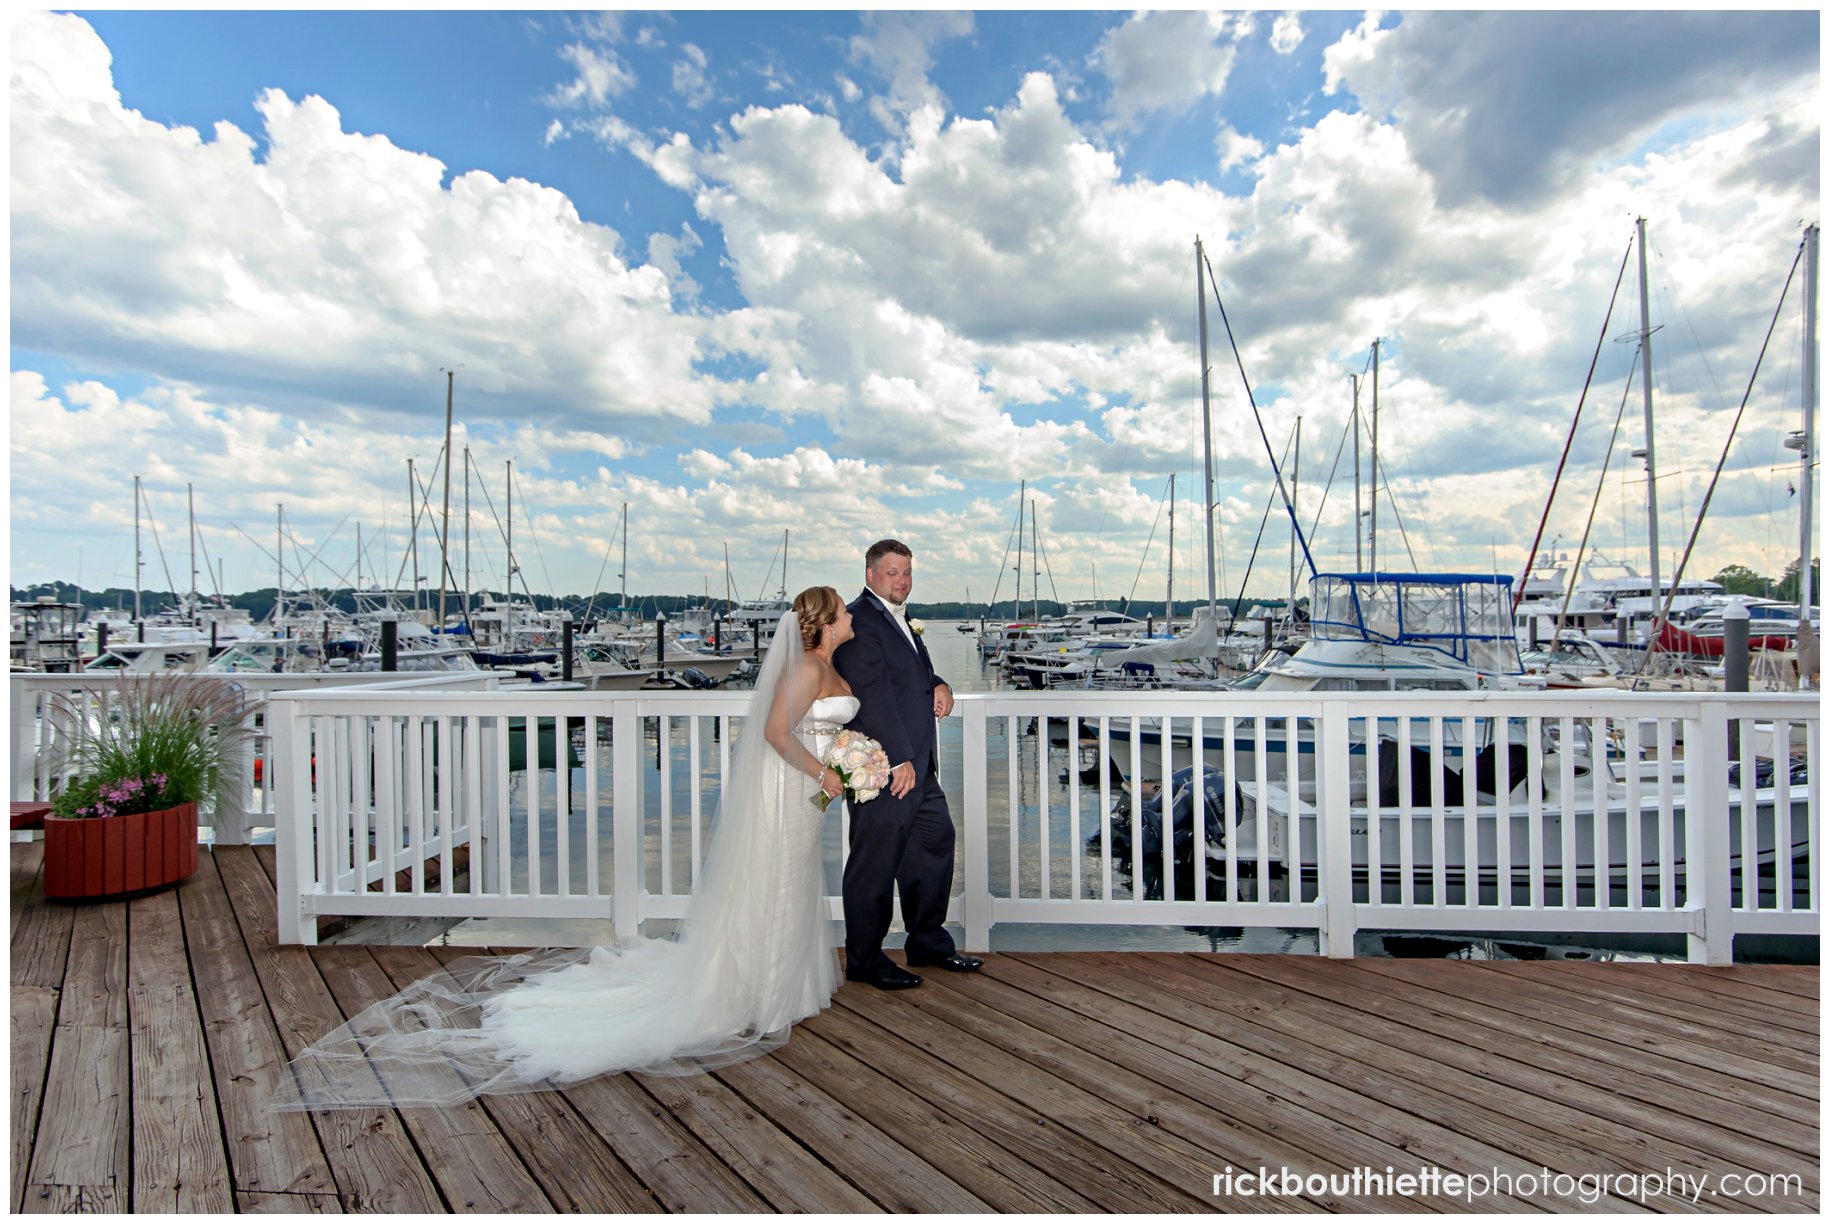 bride & groom overlooking the marina at their Wentworth By The Sea wedding